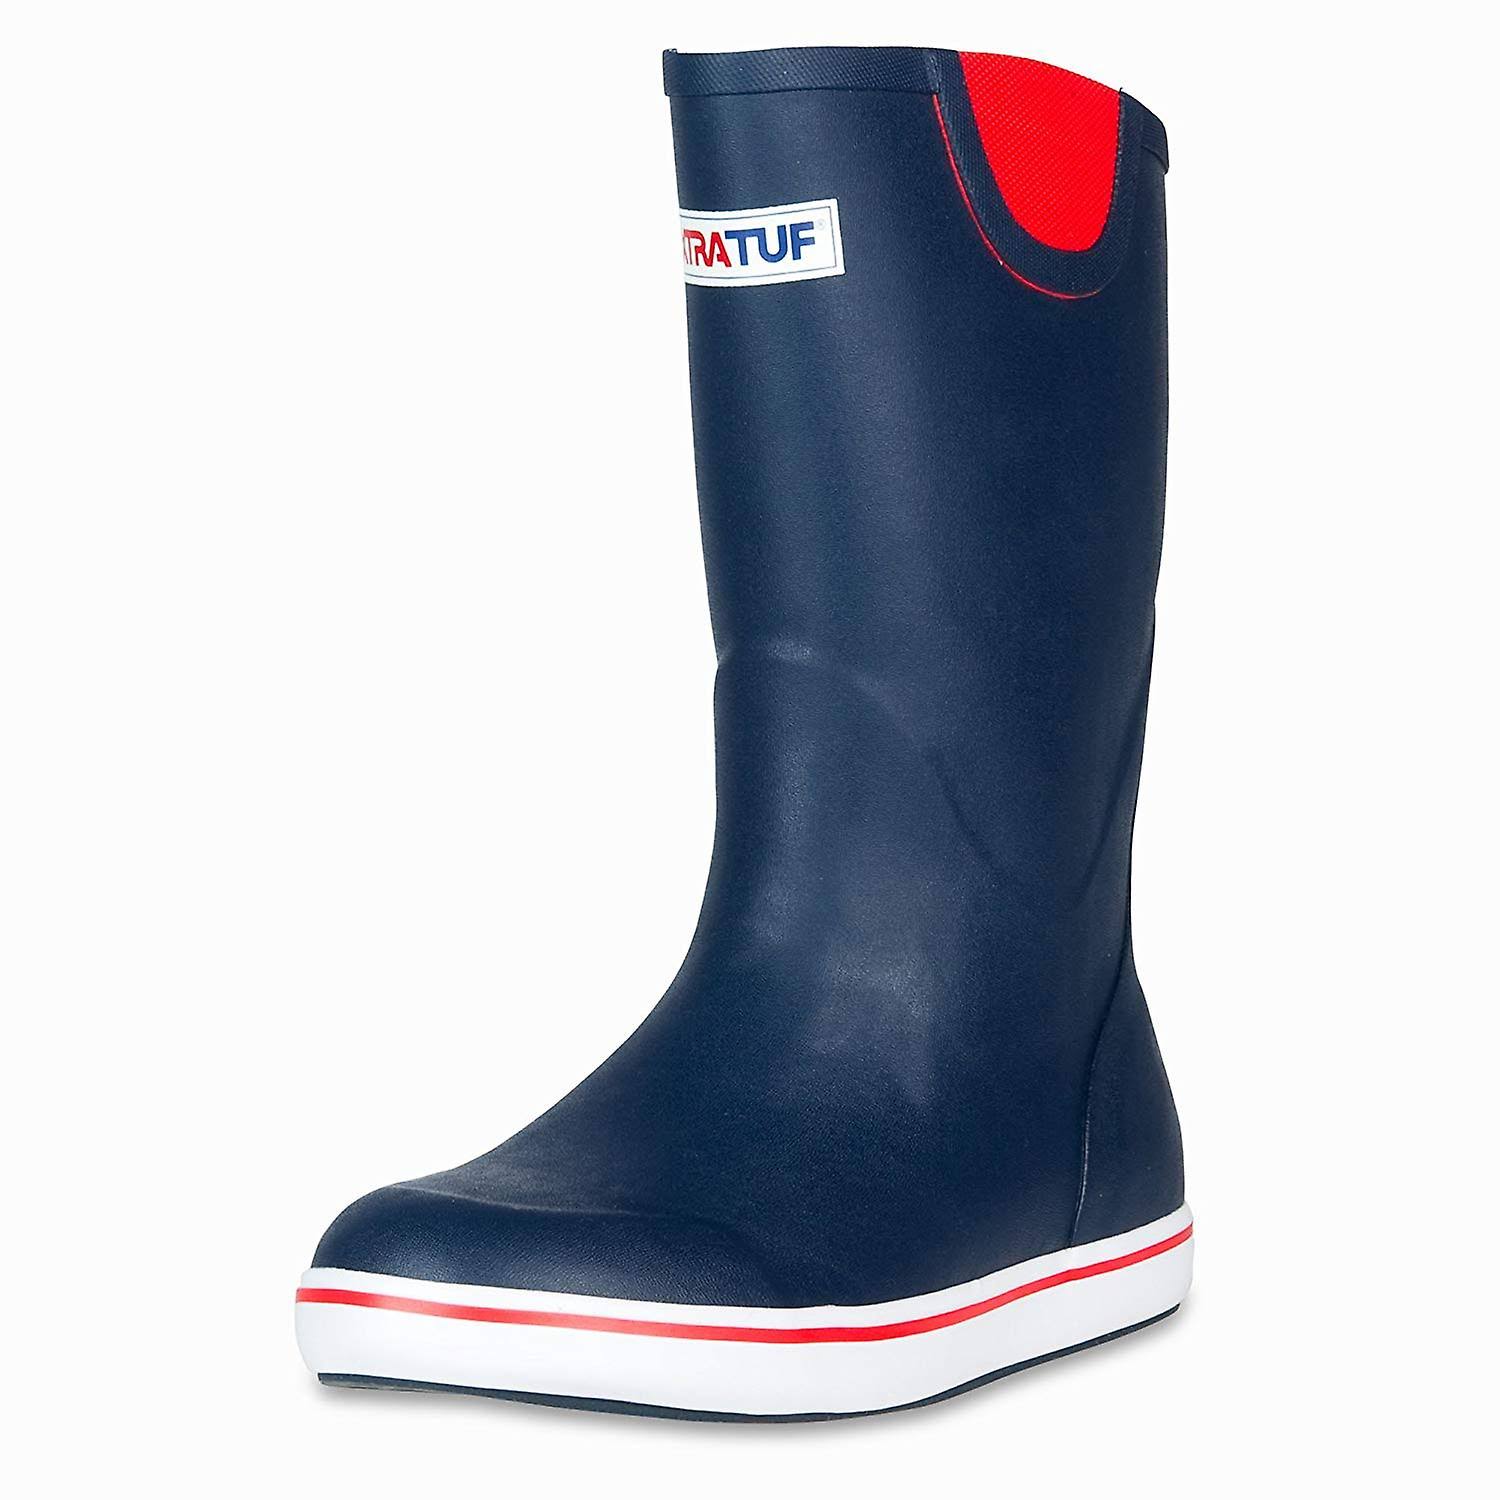 XTRATUF Performance Series 12" Men's Full Rubber Deck Boots, Navy/Red, Size 8.0